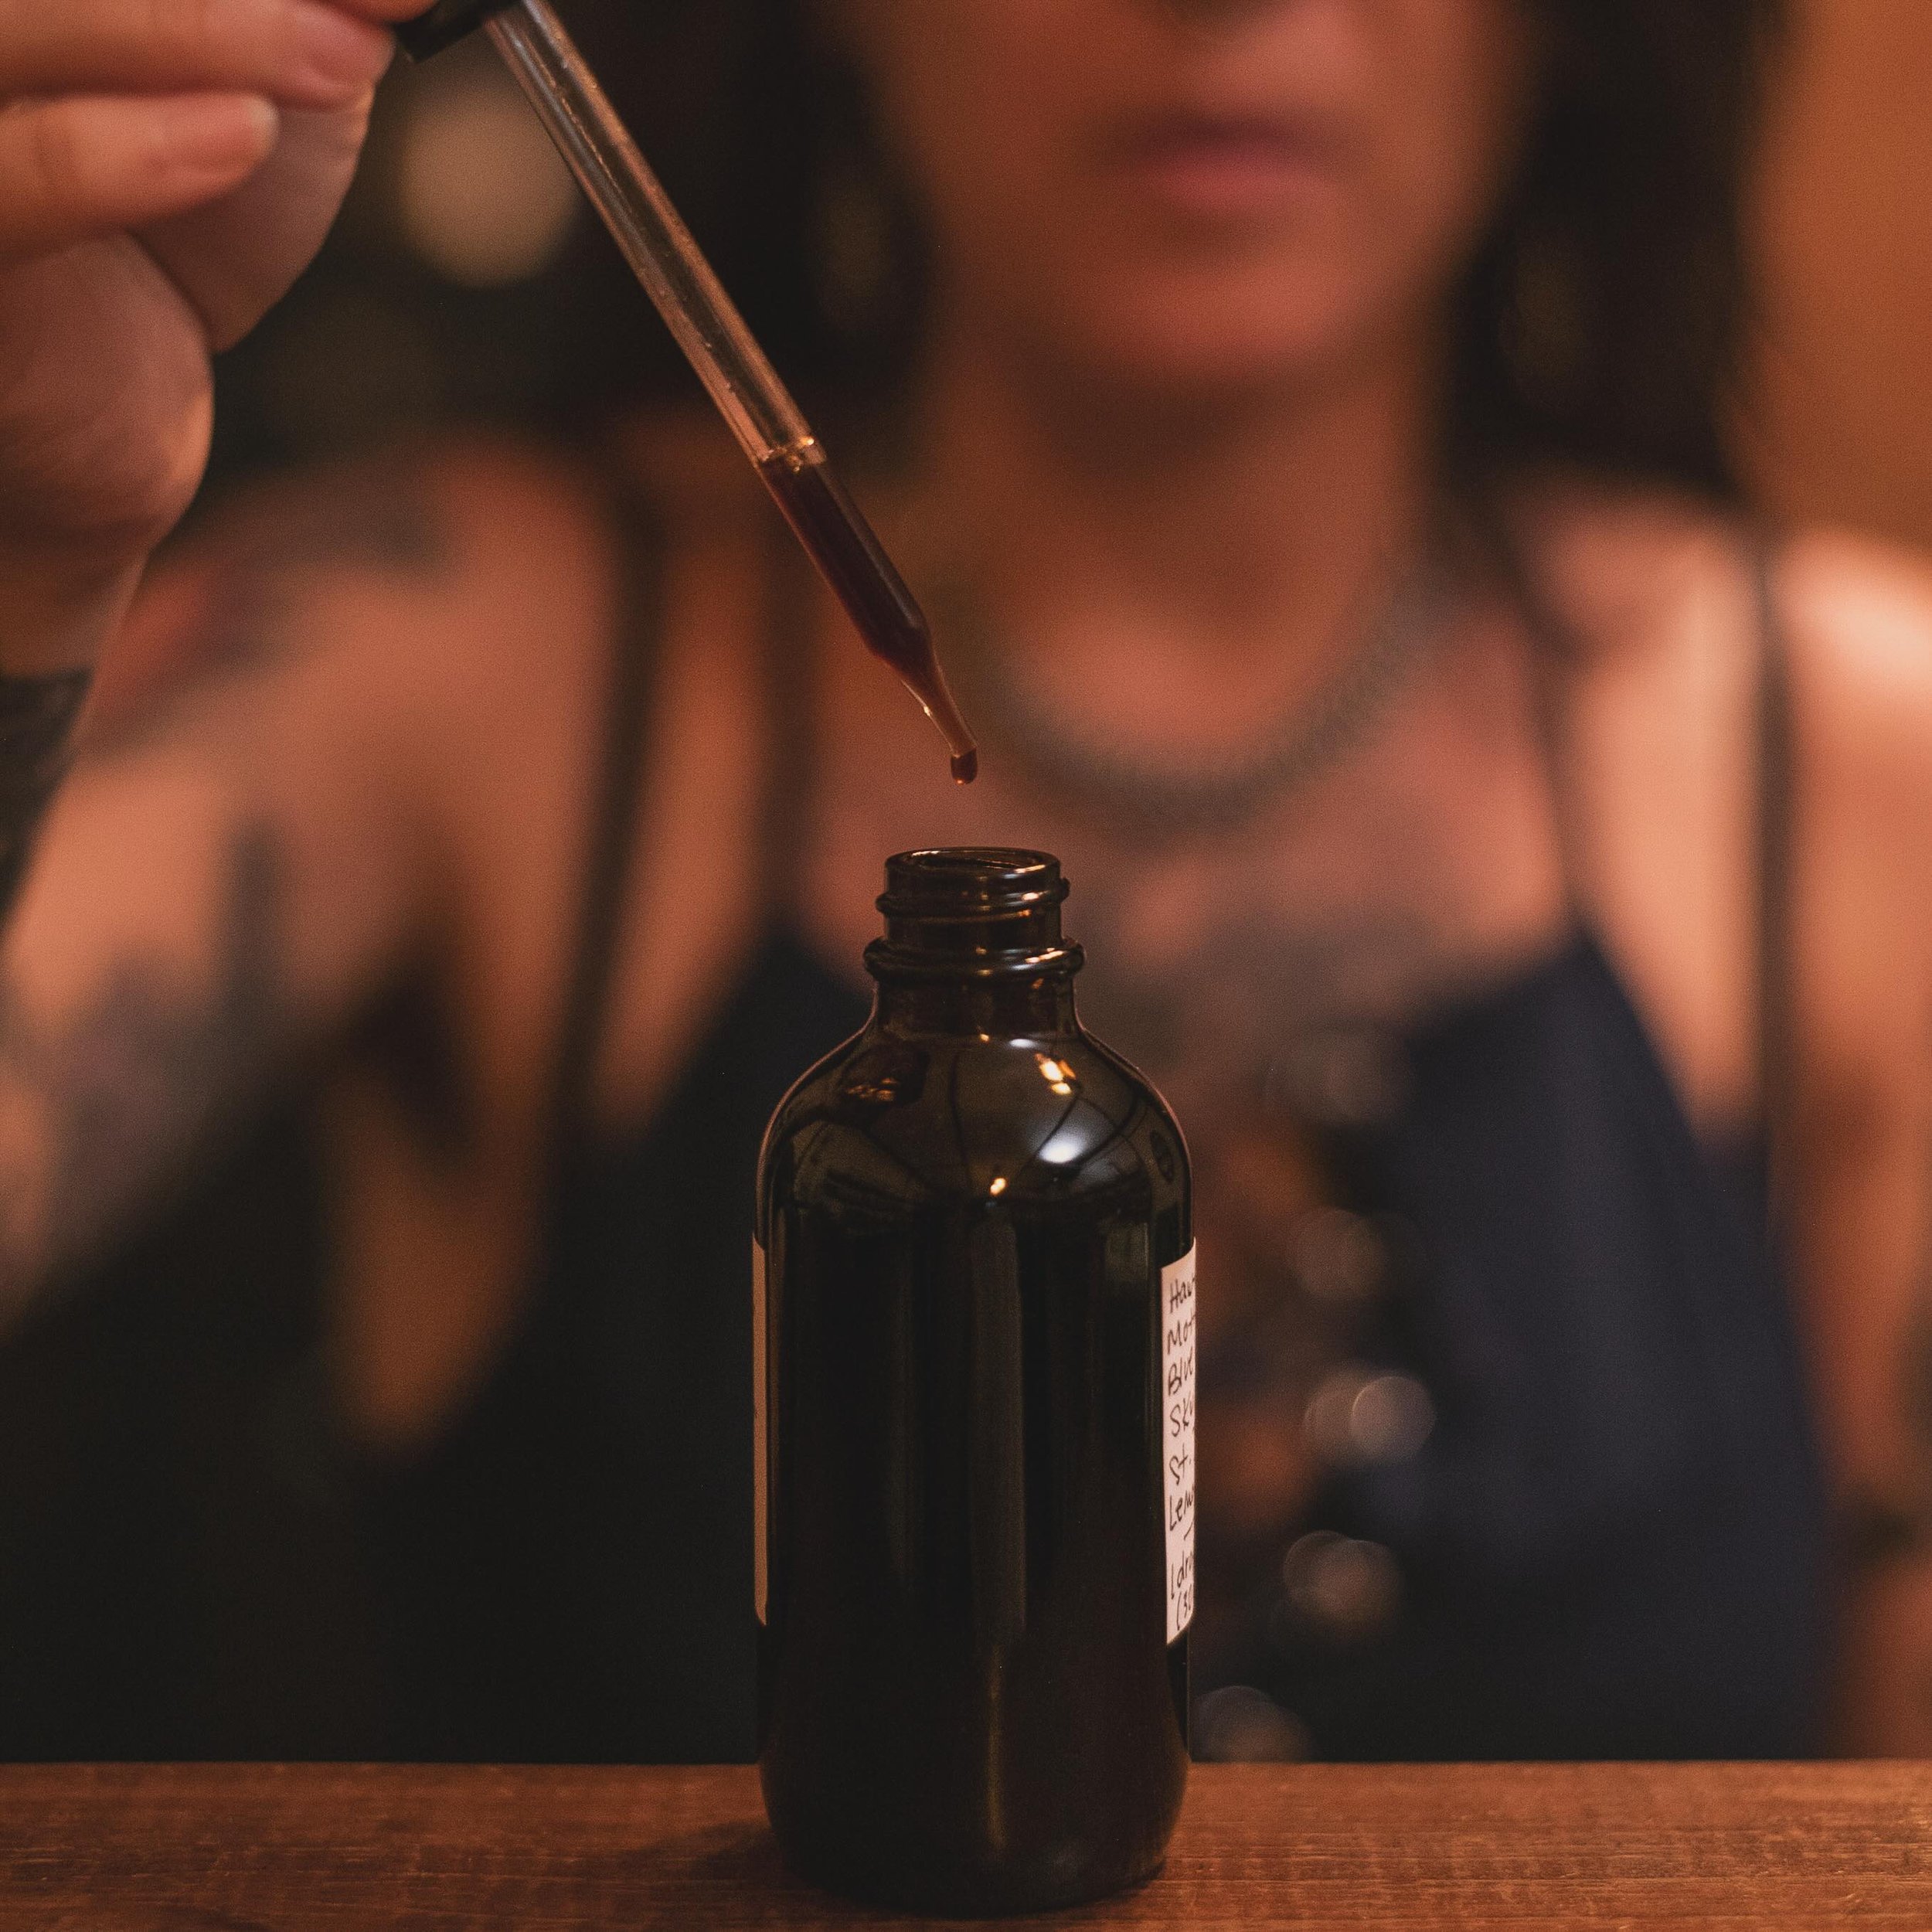 Did you know we do custom tinctures here? 
While we have tinctures already made by various herbalists on the shelf, we also do on the spot custom formulas at our &ldquo;formulation station&rdquo; suited to your unique needs in the moment. 
Come by to